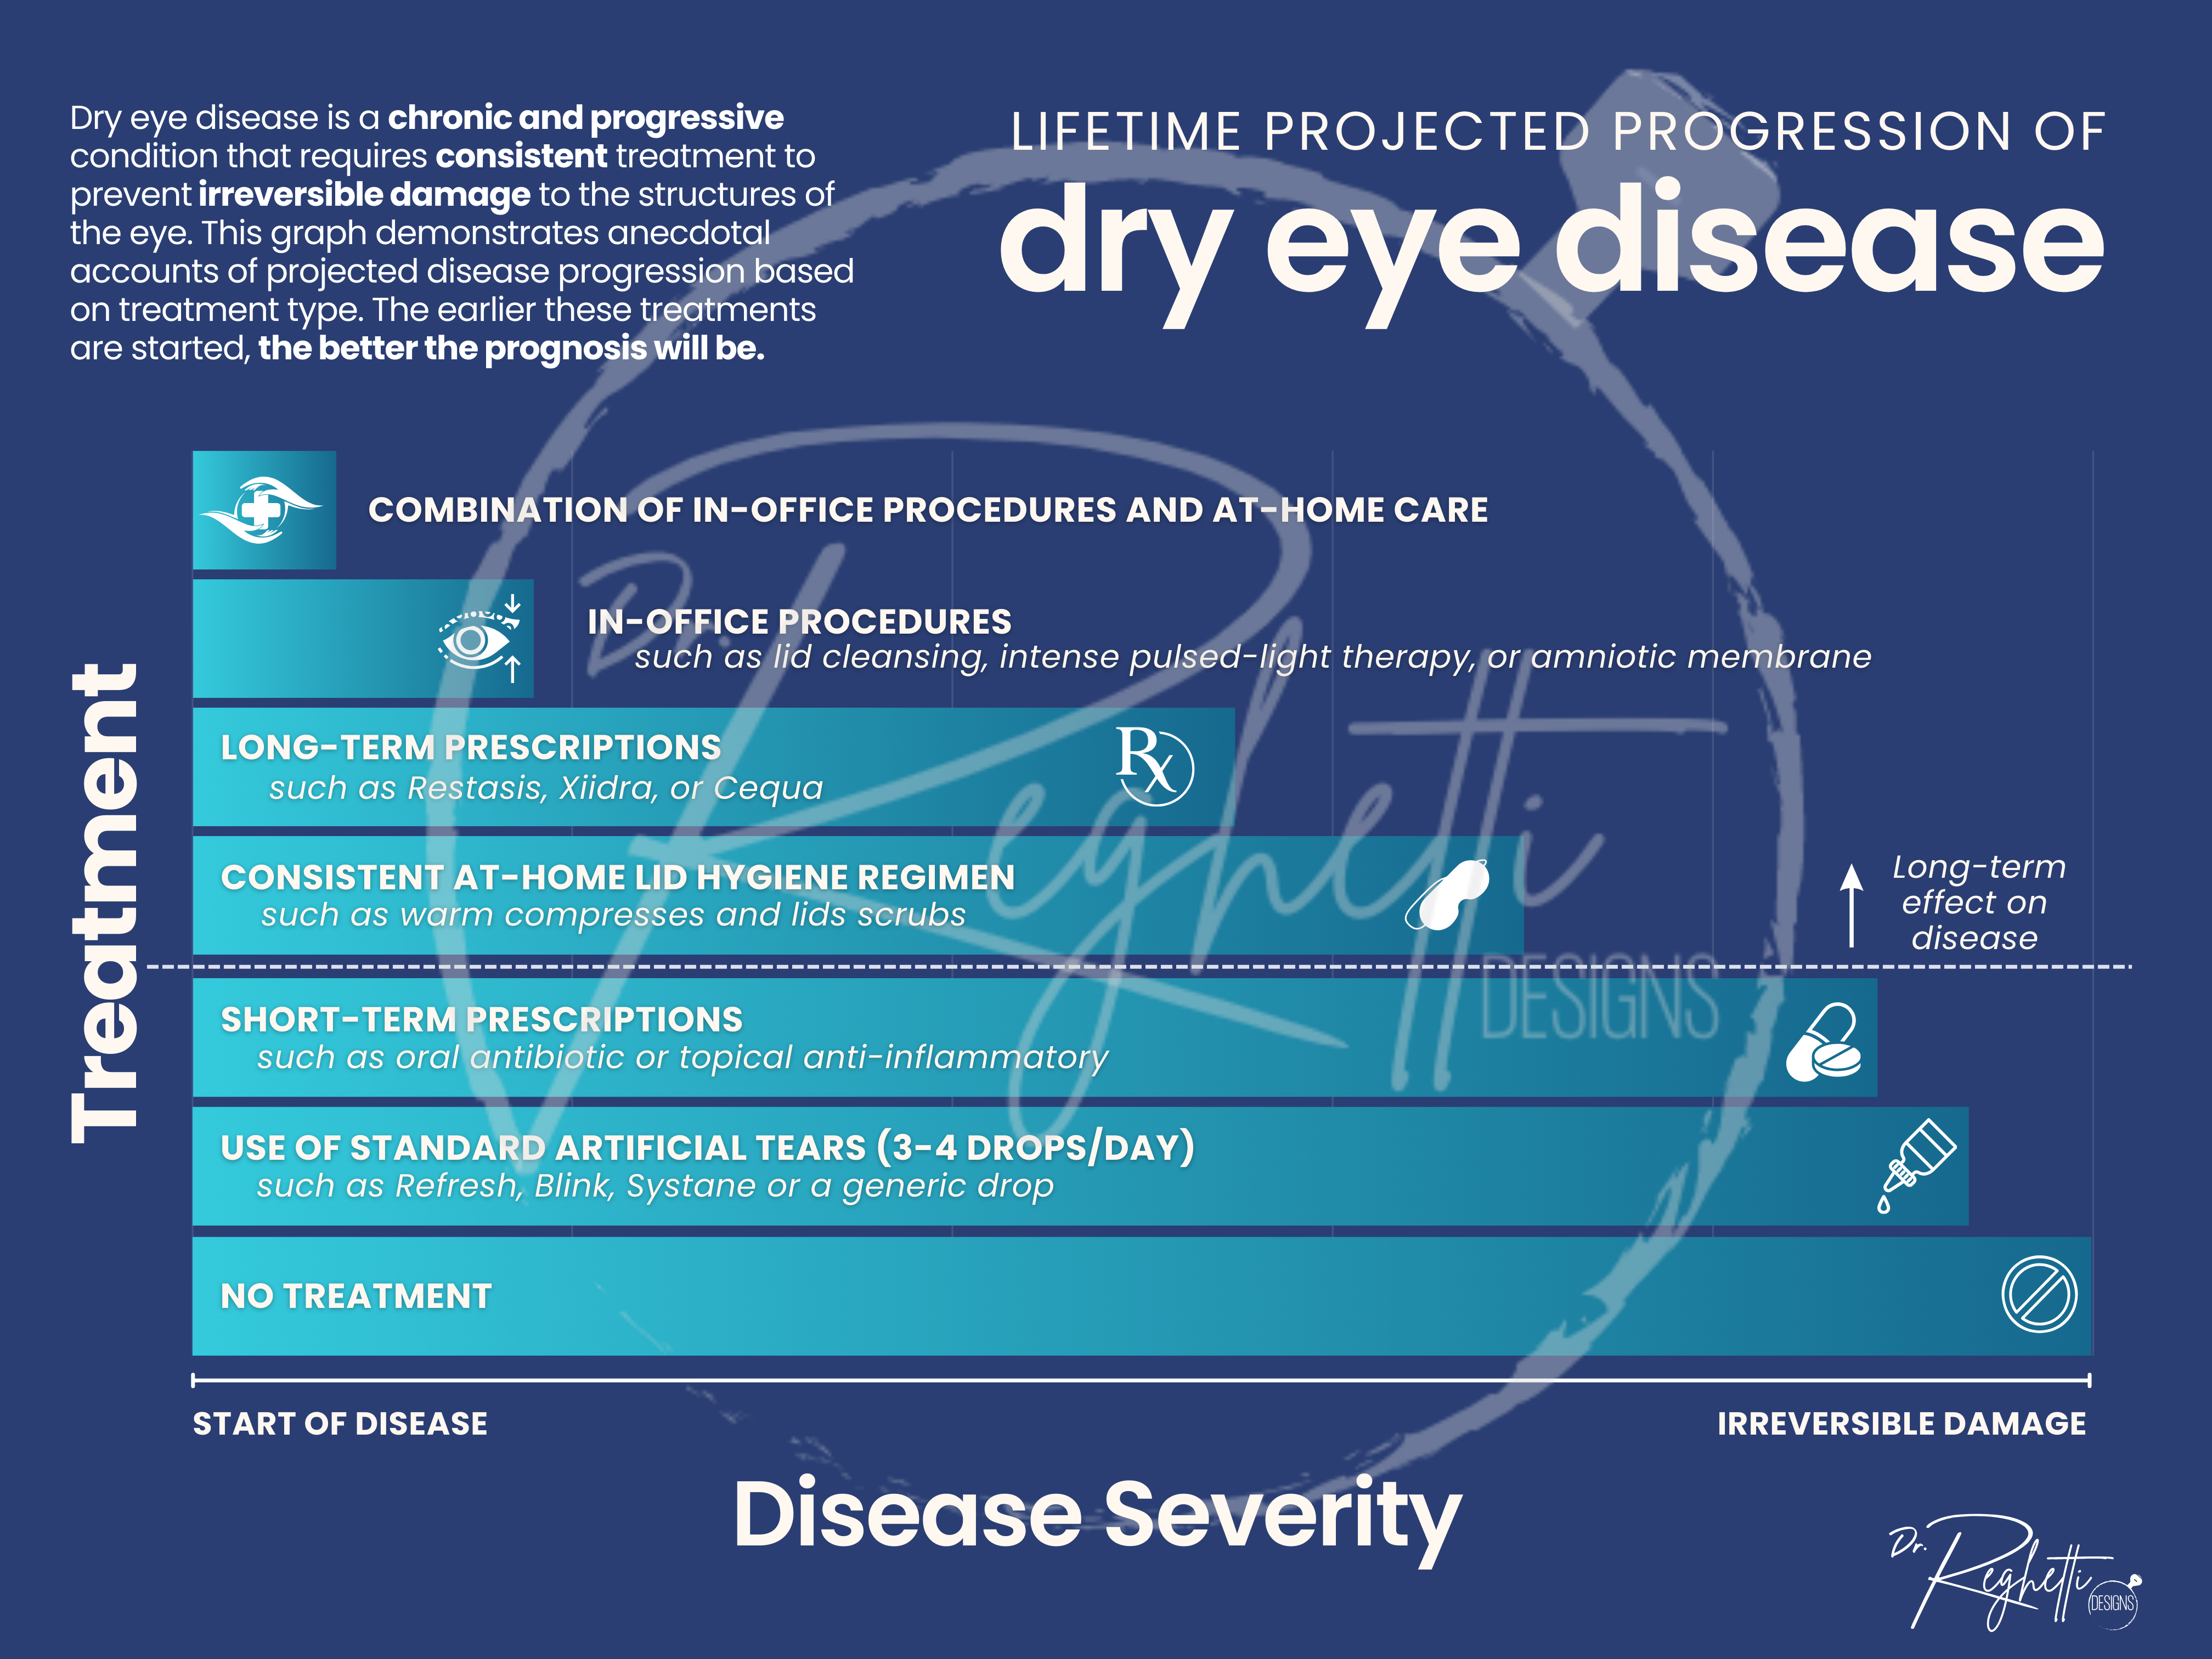 patient education for dry eye clinic optometrist office showing projection of dry eye disease severity based on treatment 